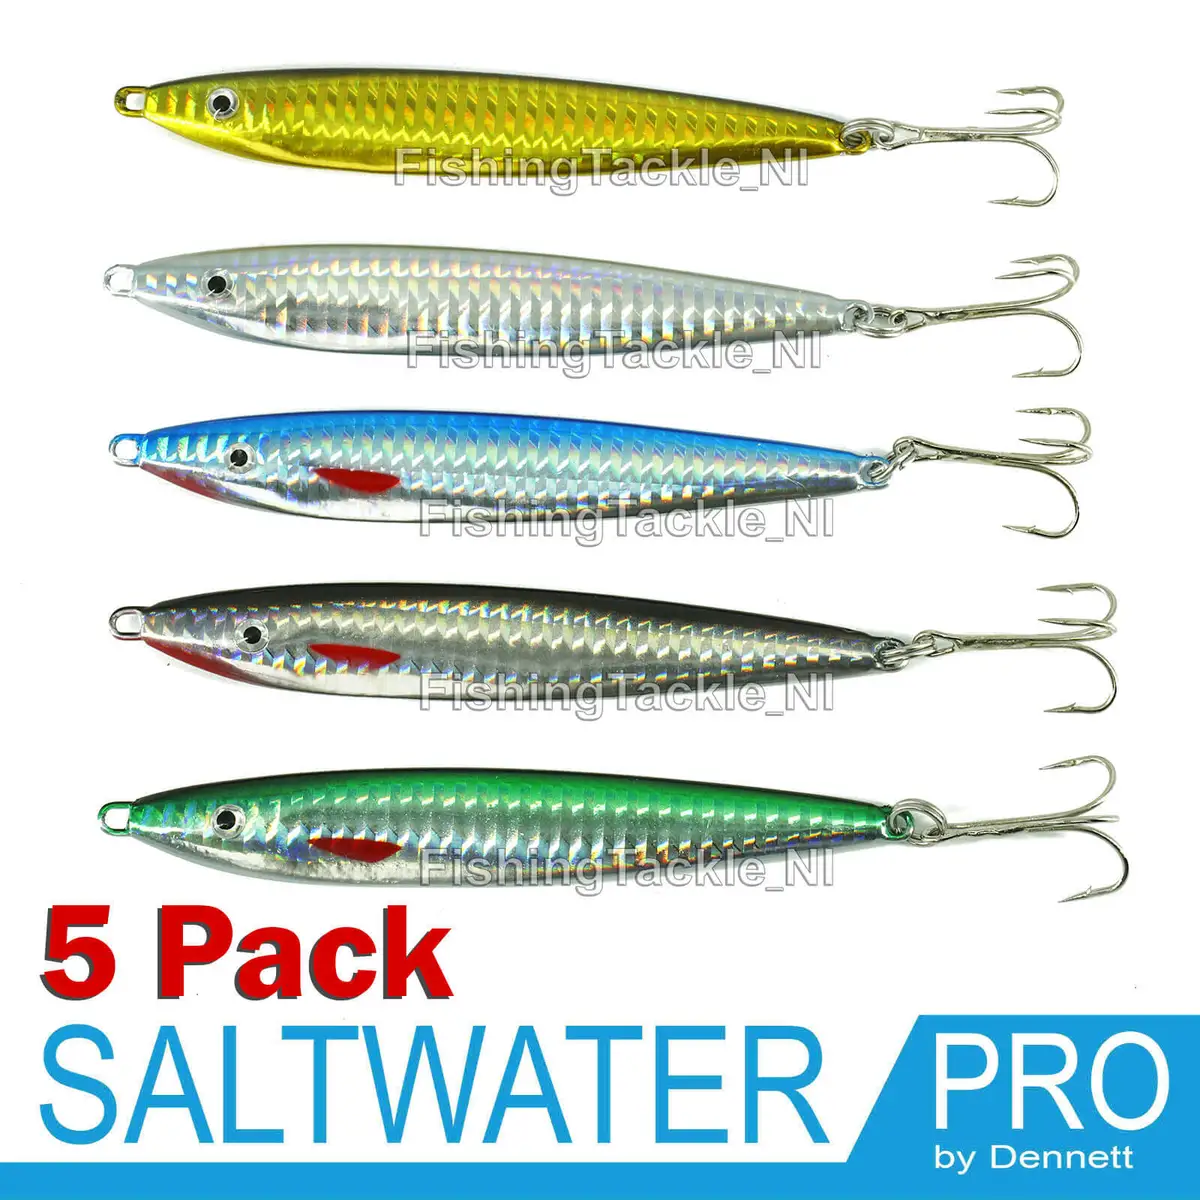 Saltwater Pro 5 Pack Lead Fish Kit Sea Fishing Sprat Lures Jig Spinners  SeaTrout